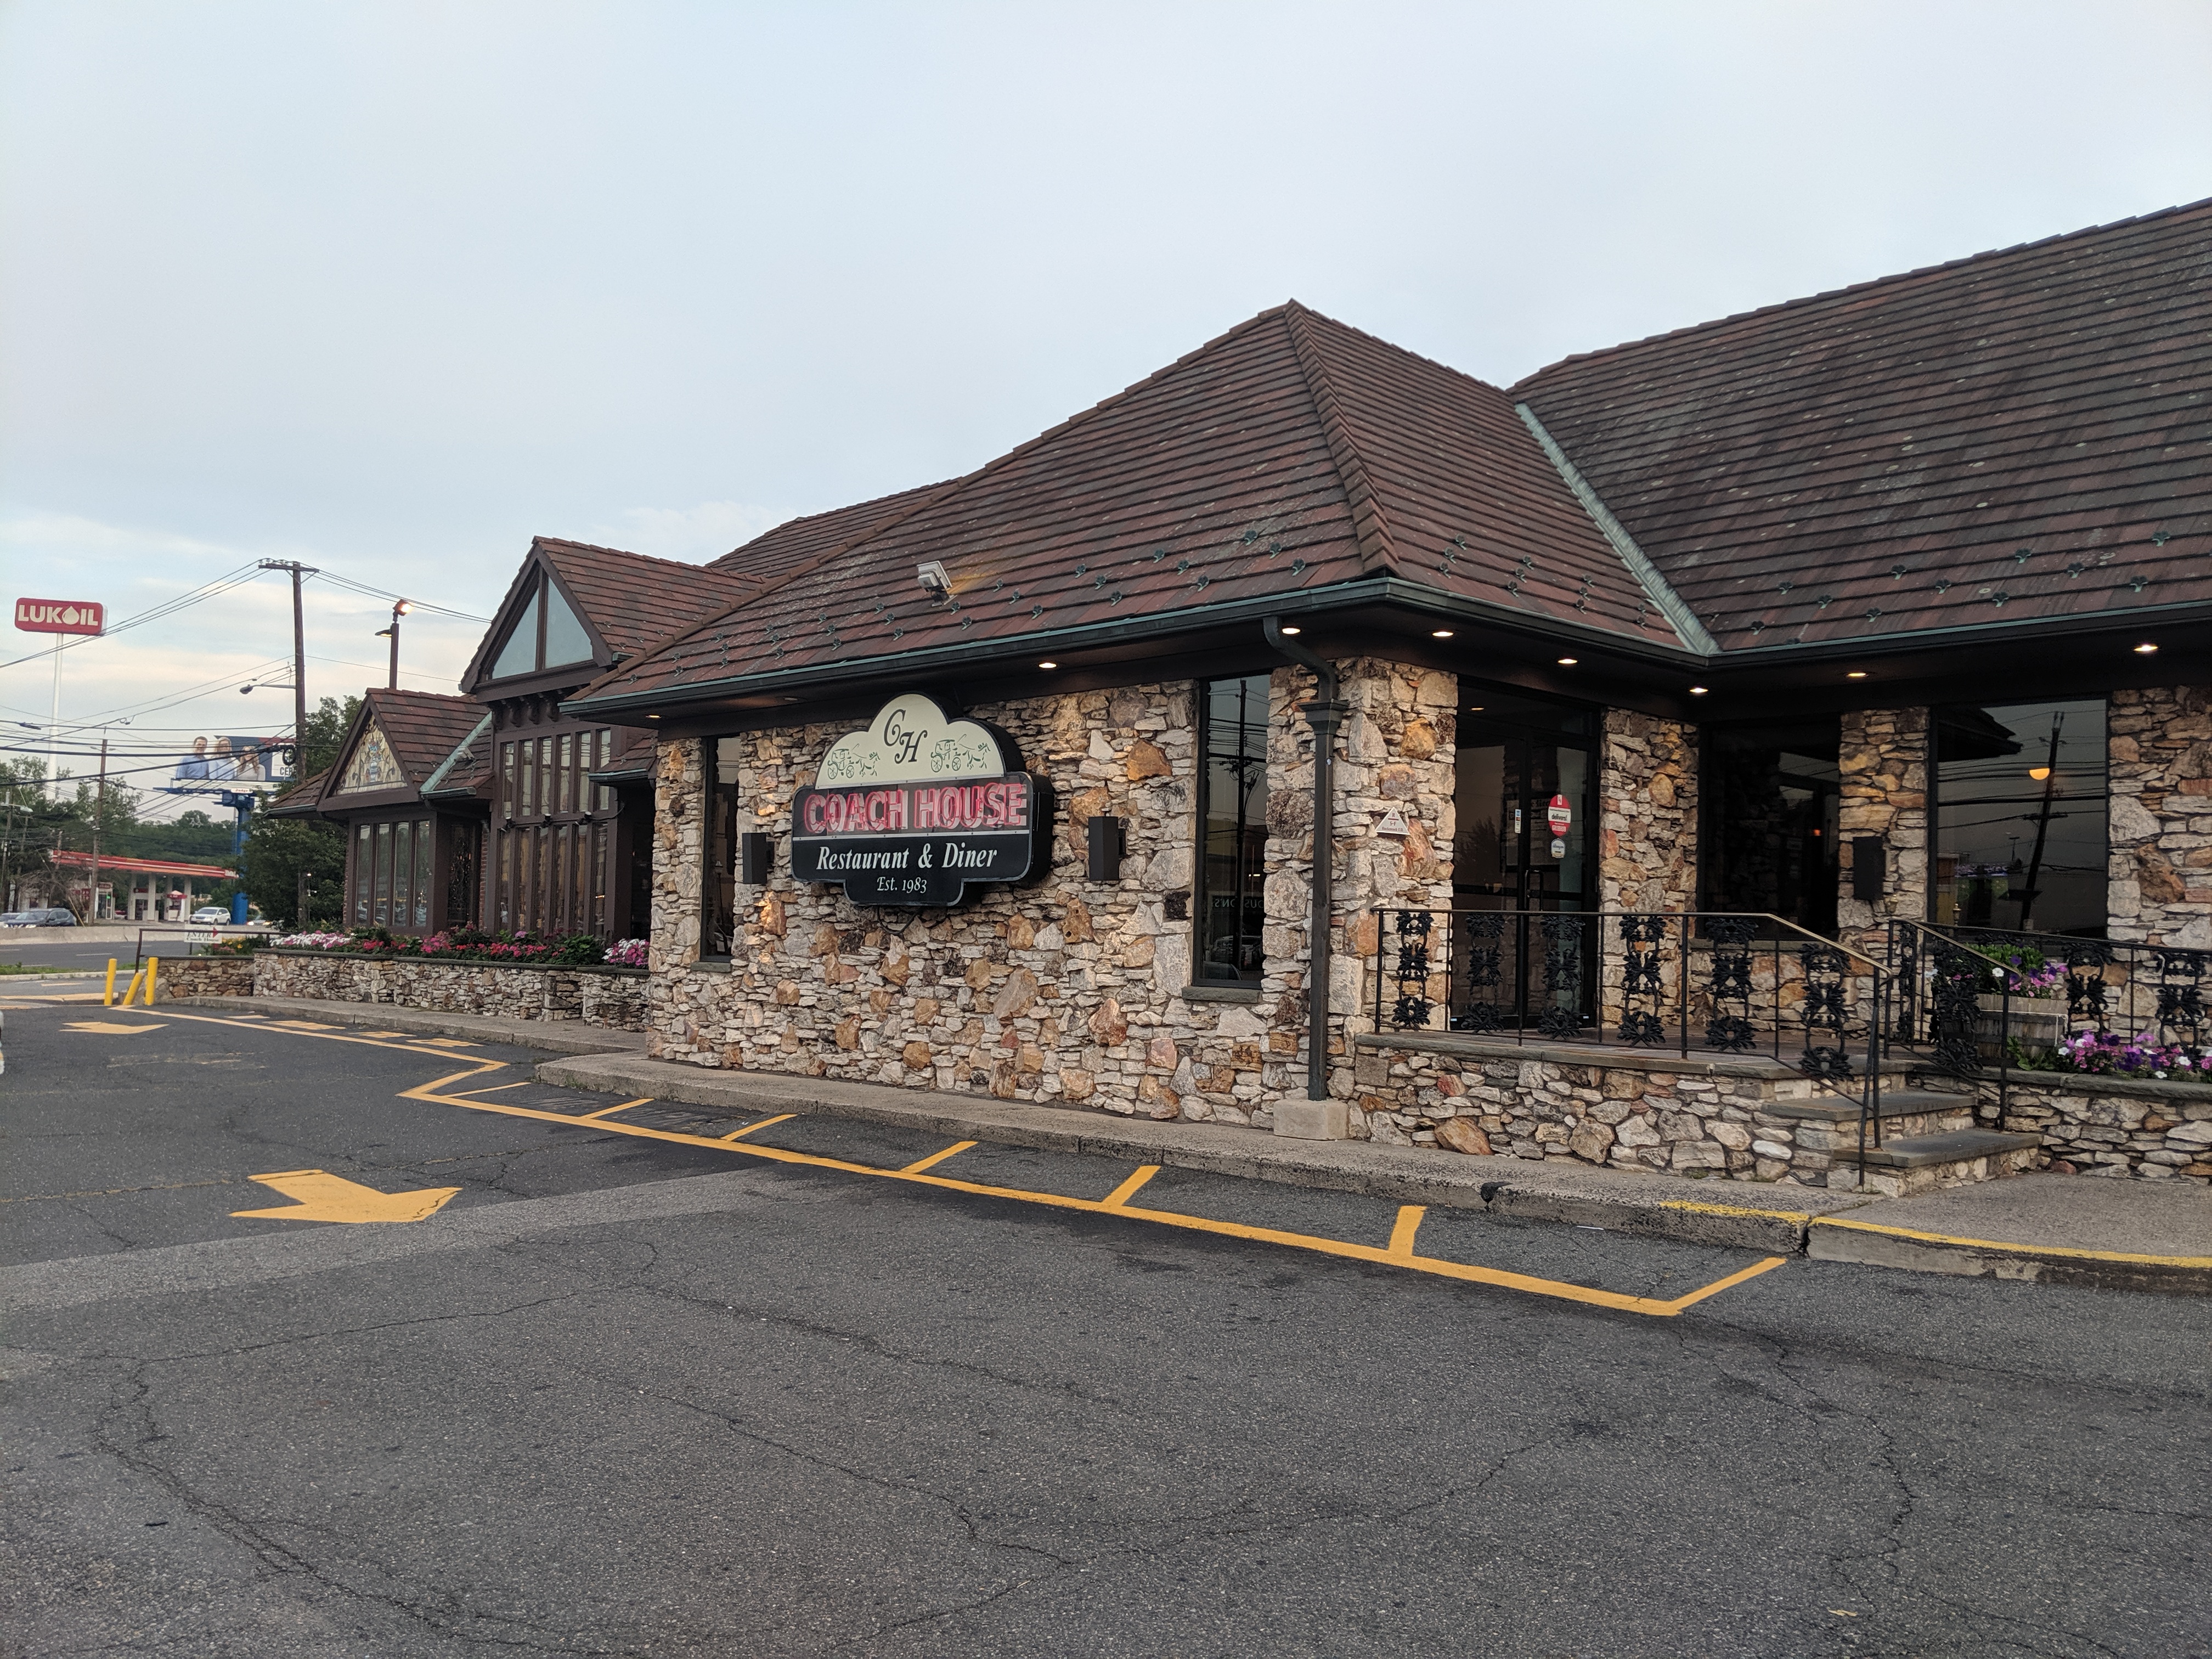 24+ Coach house diner hackensack new jersey ideas